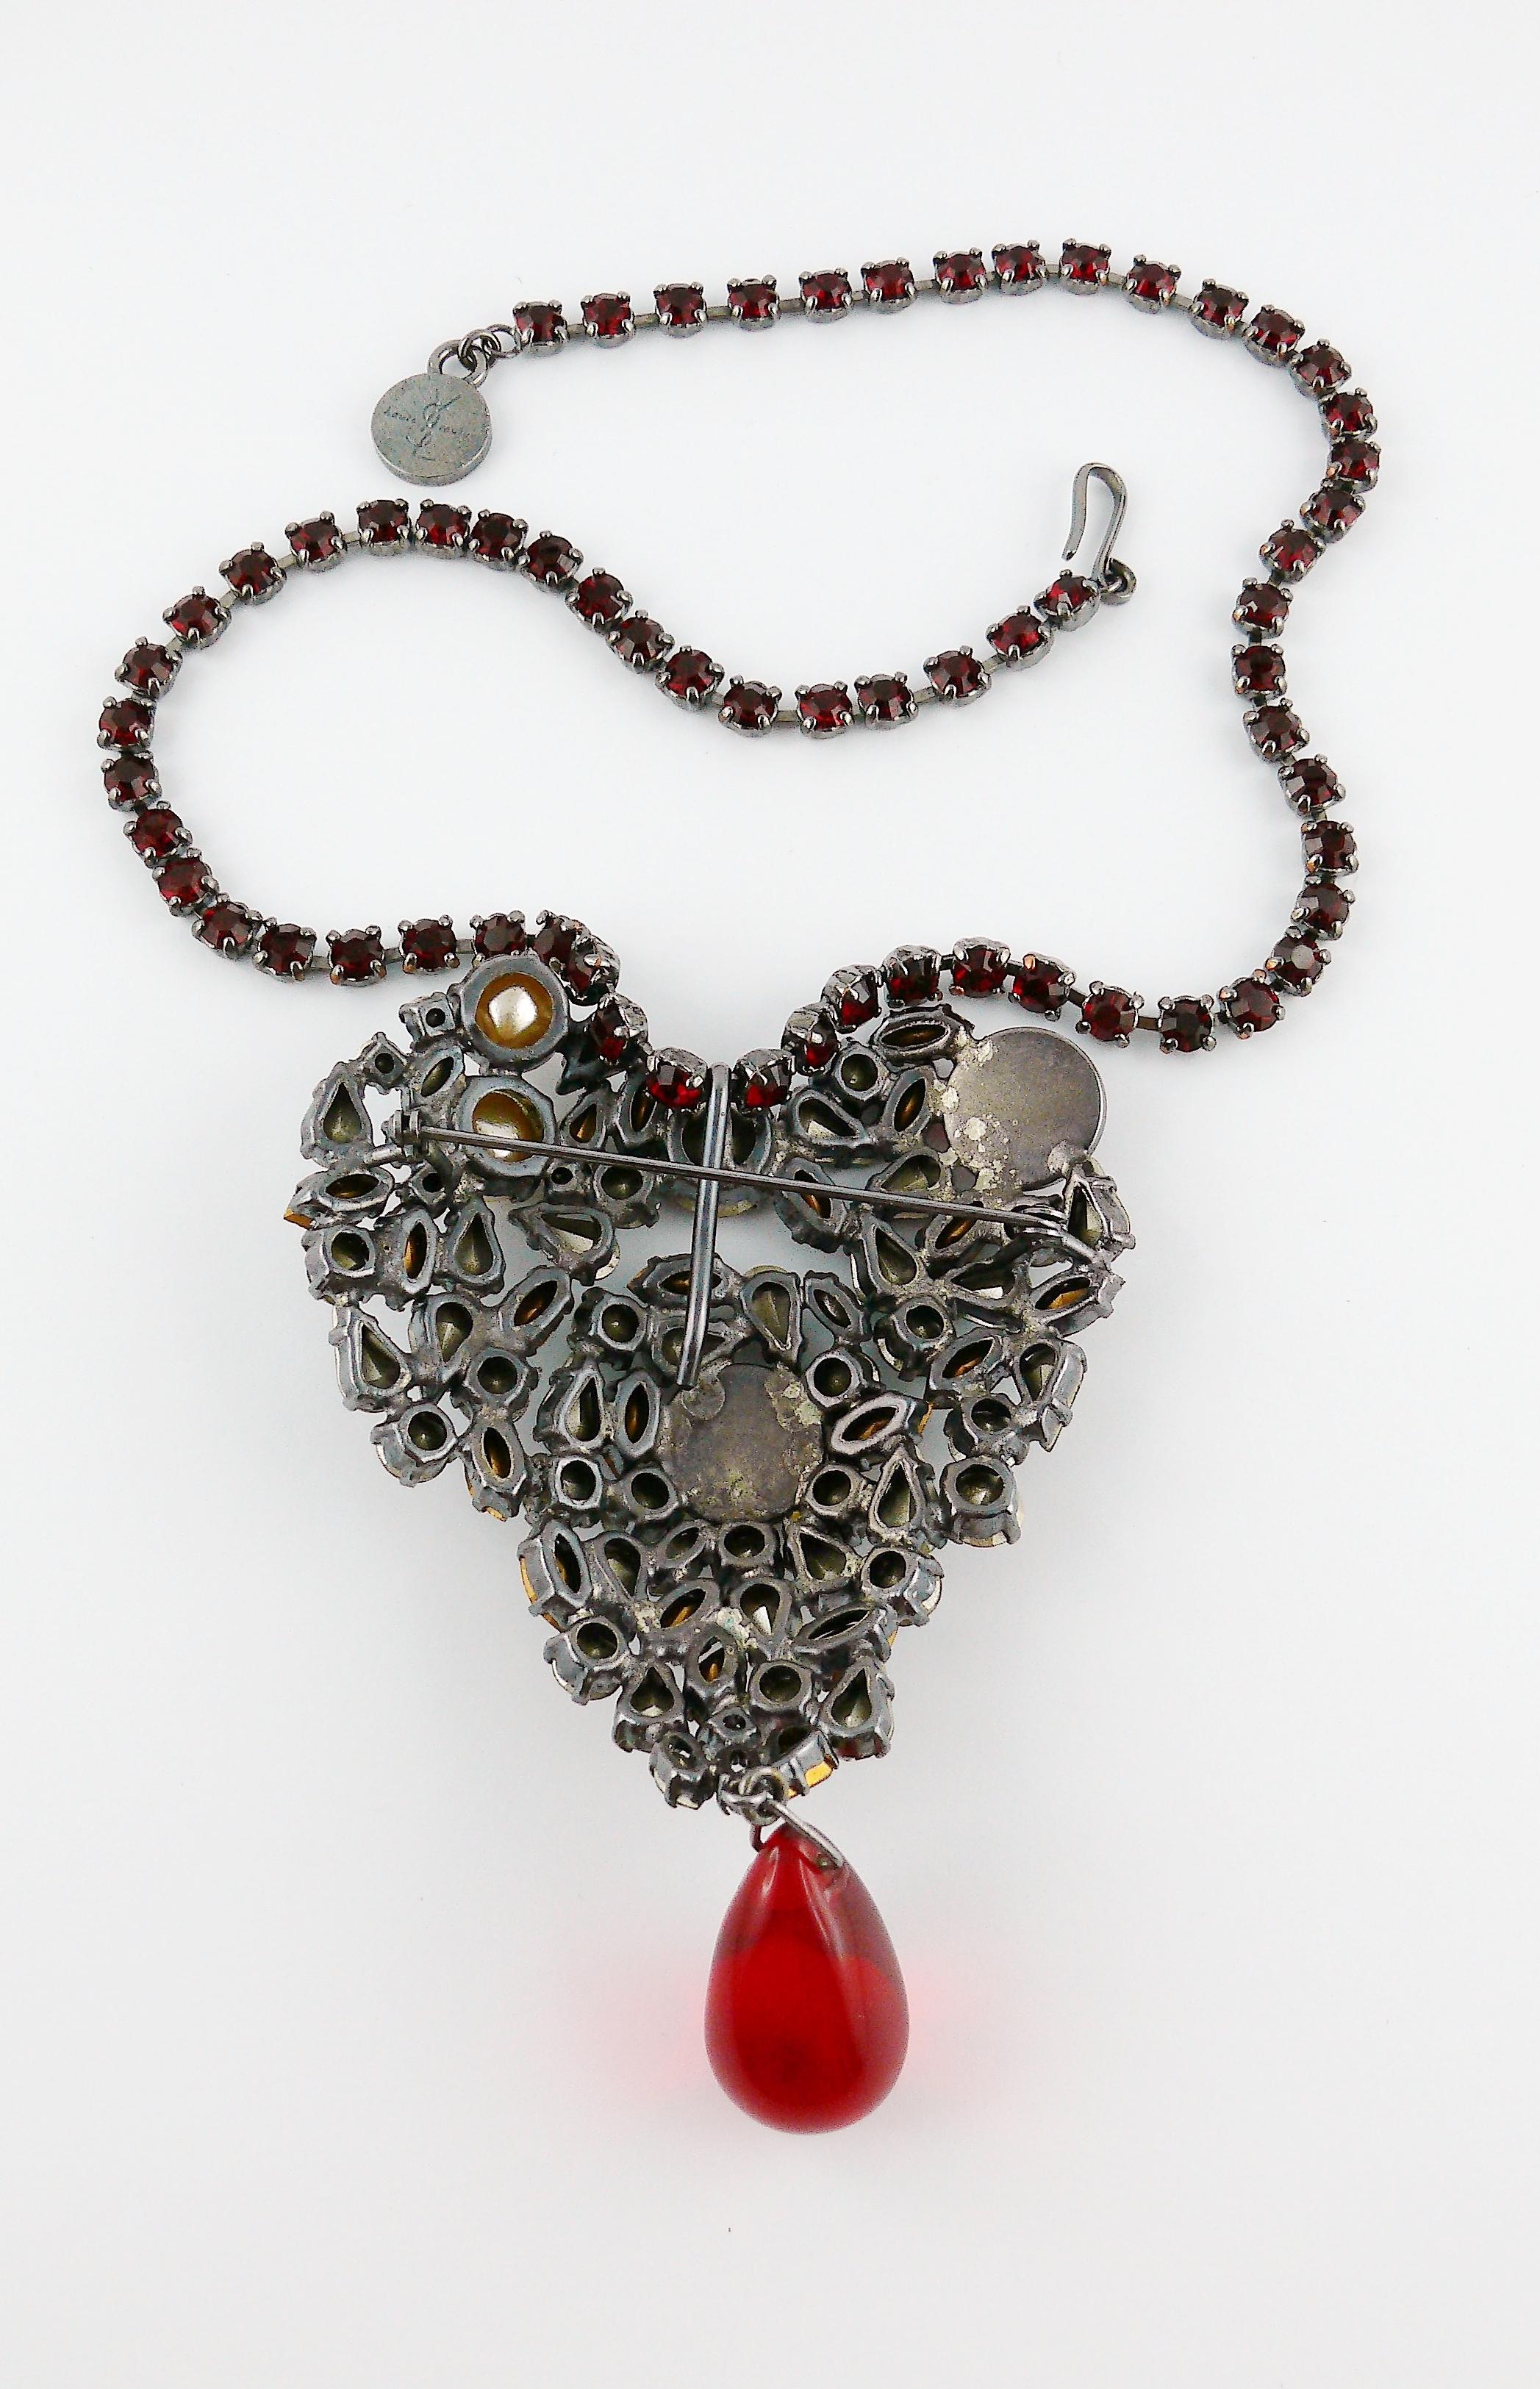 Yves Saint Laurent Haute Couture Iconic Bejeweled Heart Brooch Necklace 5